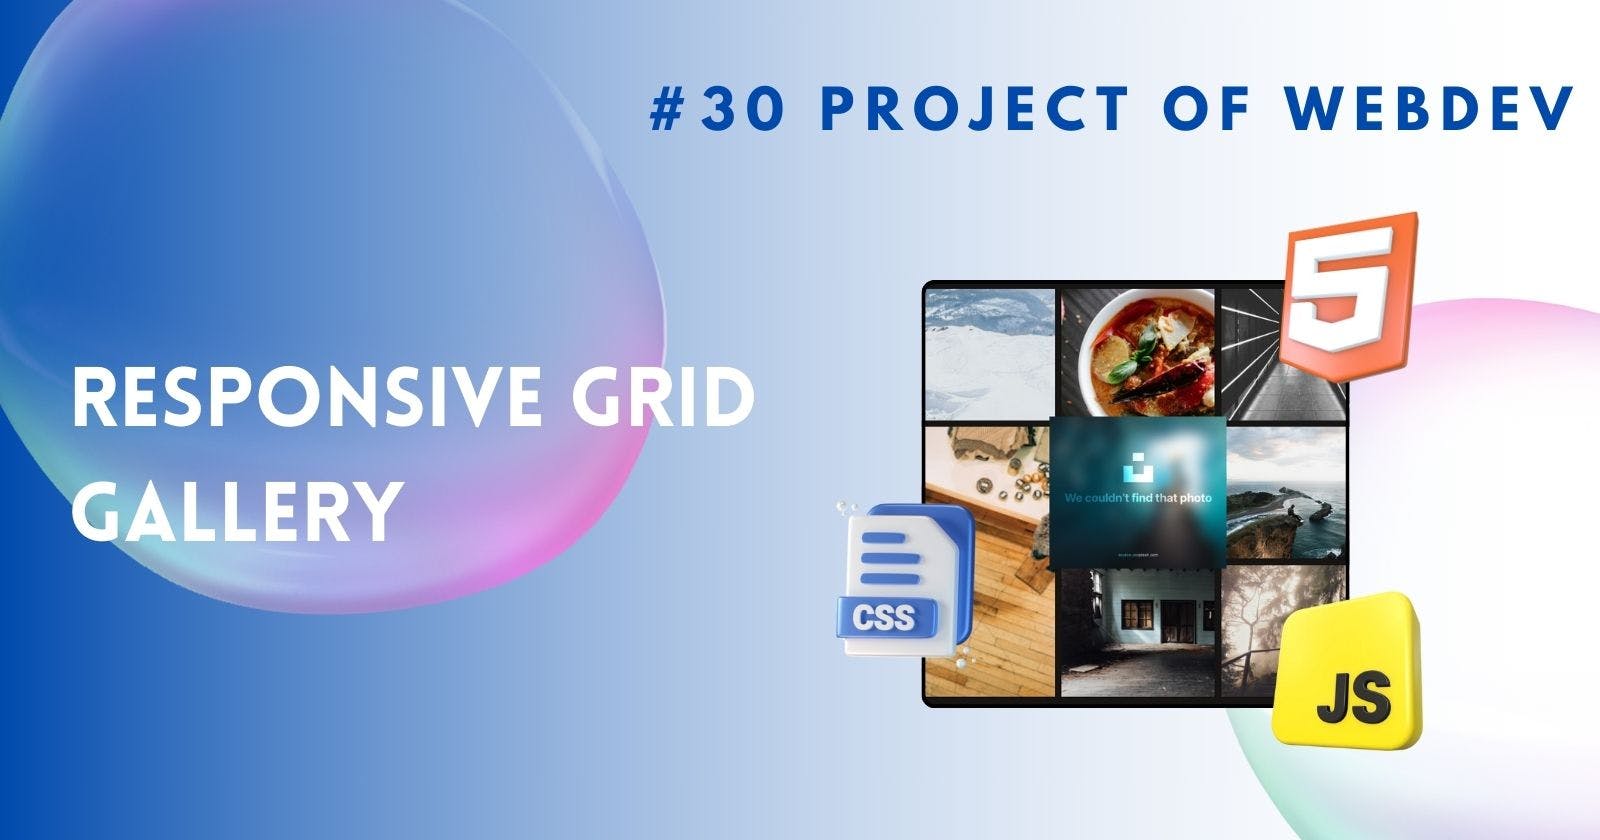 Creating Gallery Using Grid System